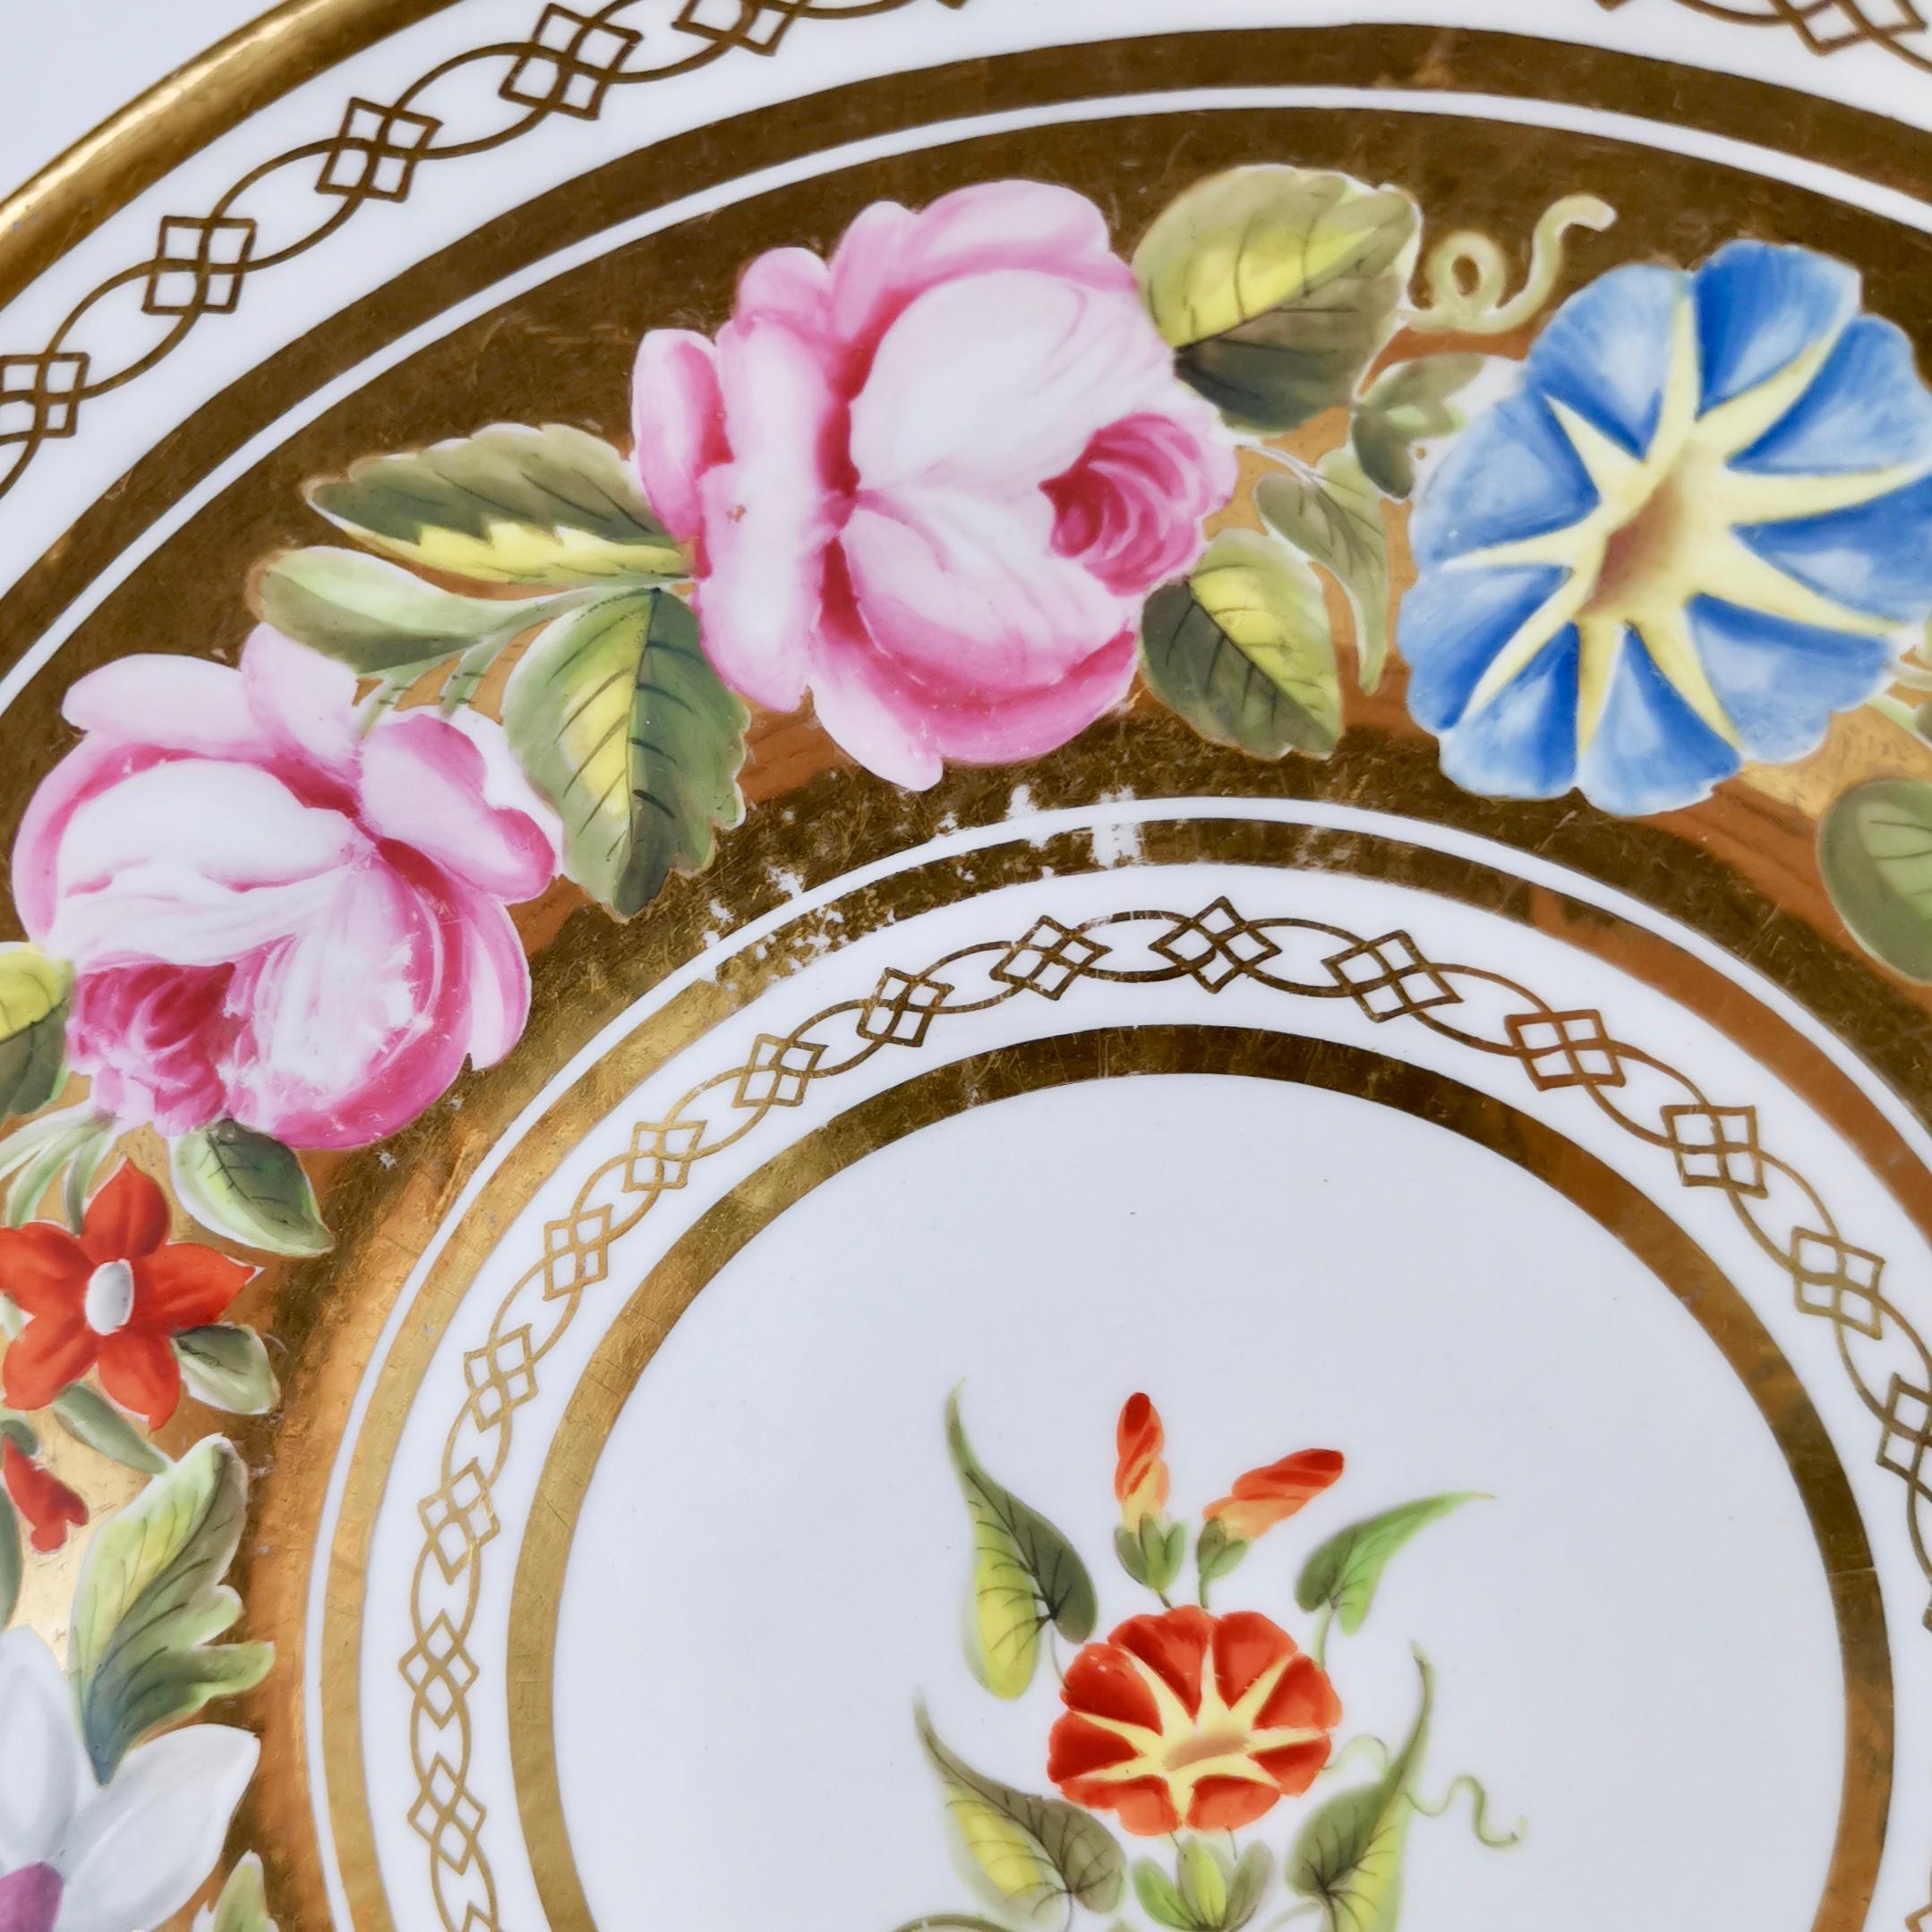 Regency Coalport Plate, Marquis of Anglesey Service, circa 1820